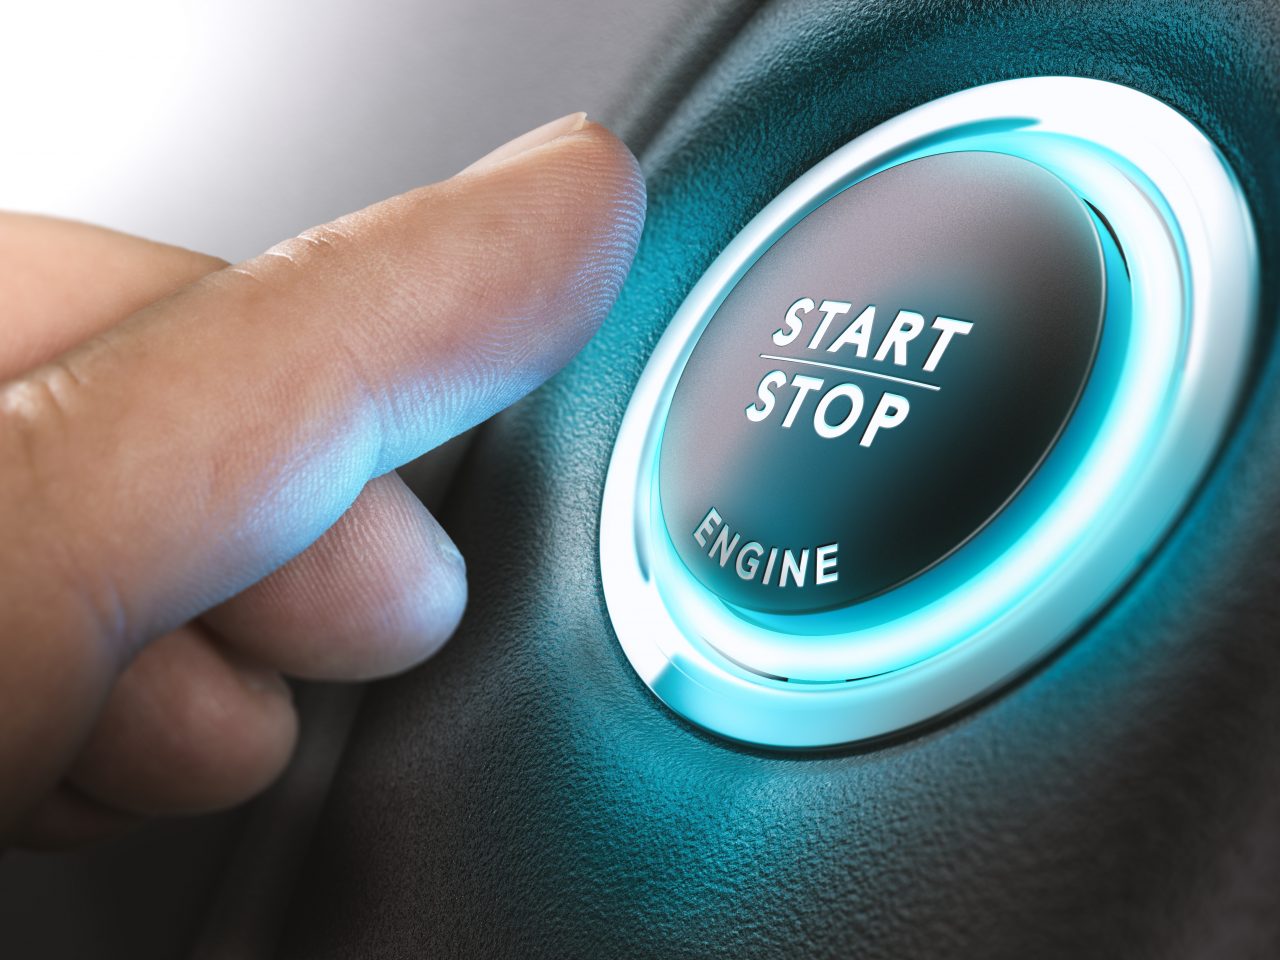 Car stop start system with finger pressing the button, horizontal image